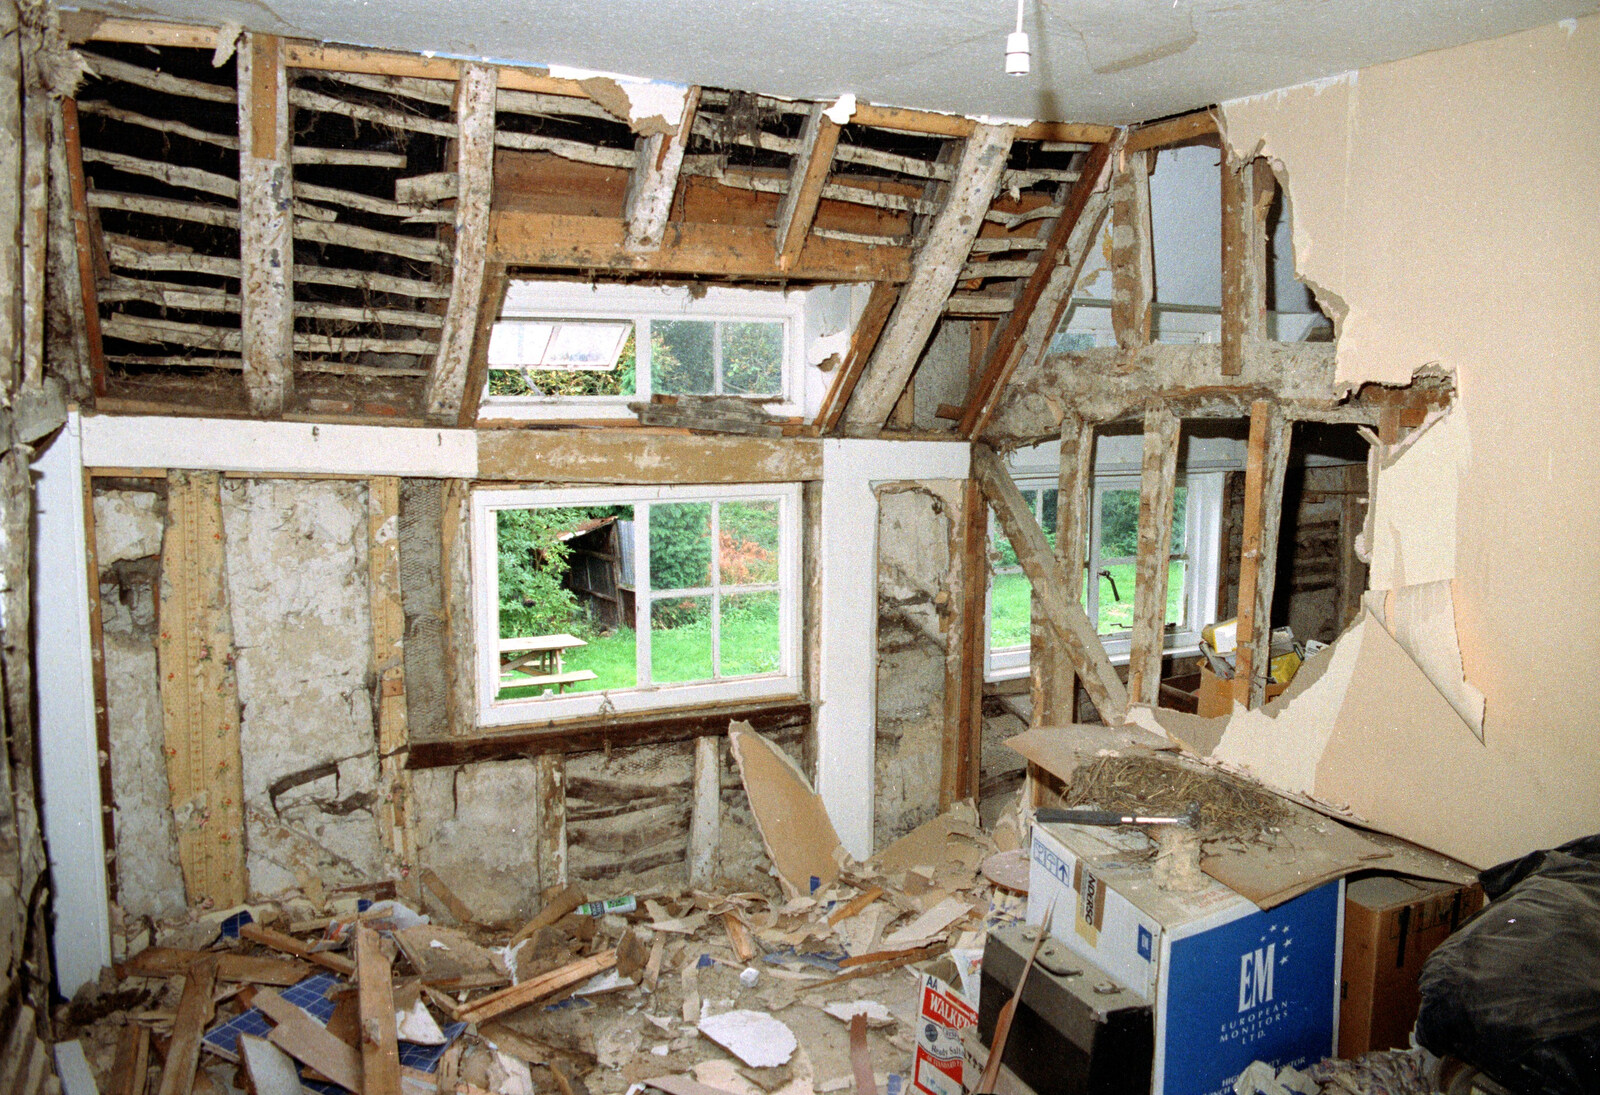 A scene of devastation, with the 1958 ceiling still in place from Bedroom Demolition, Brome, Suffolk - 10th October 1994